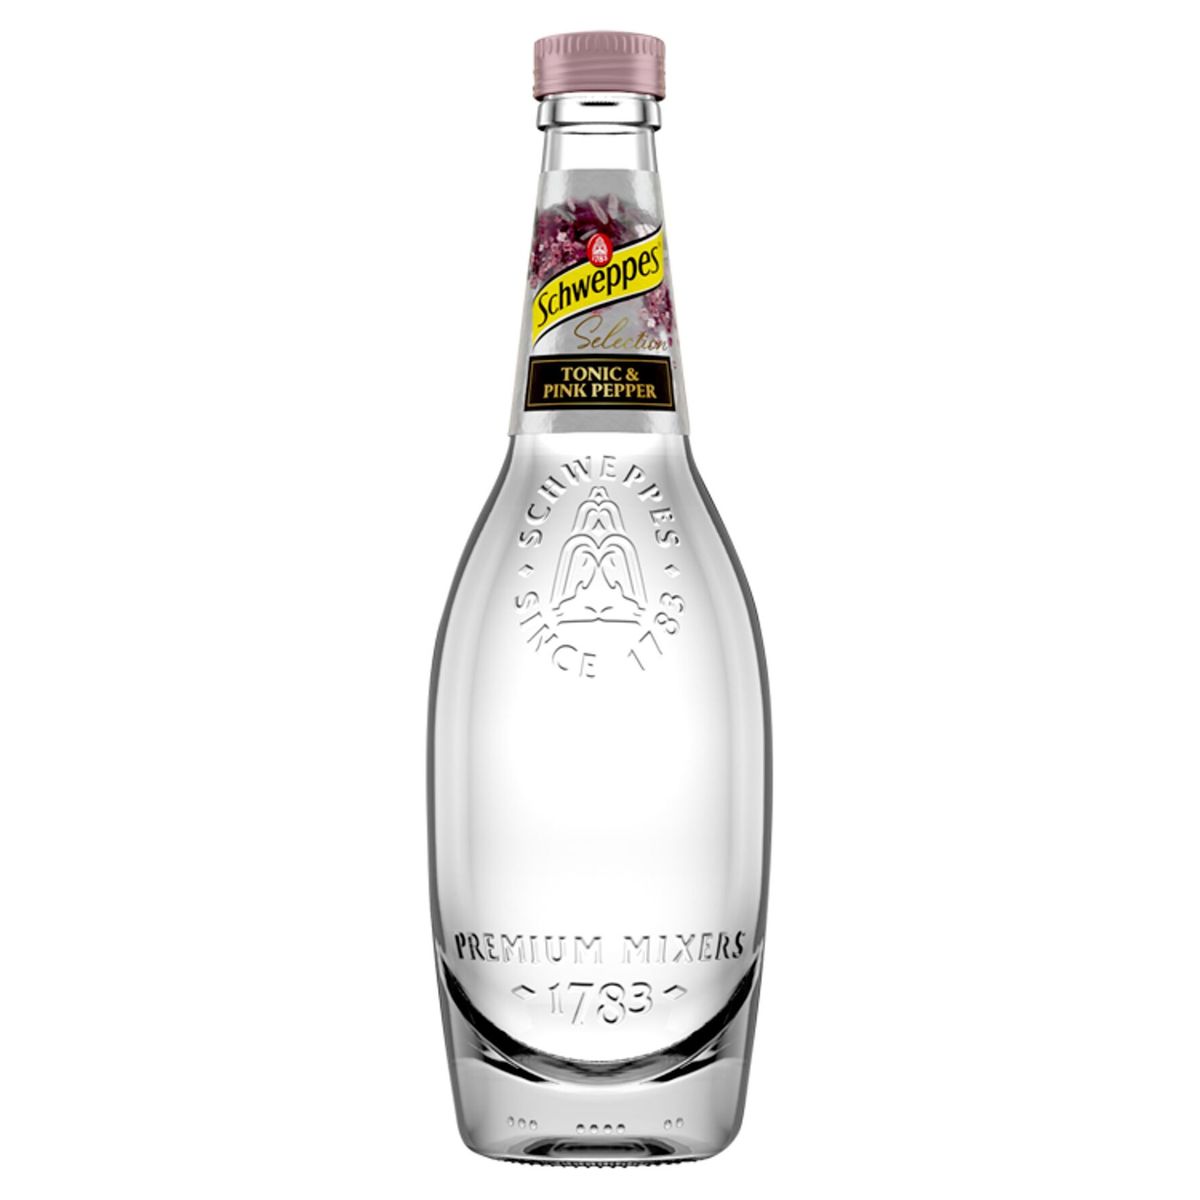 Schweppes Selection Pink Pepper 45 cl